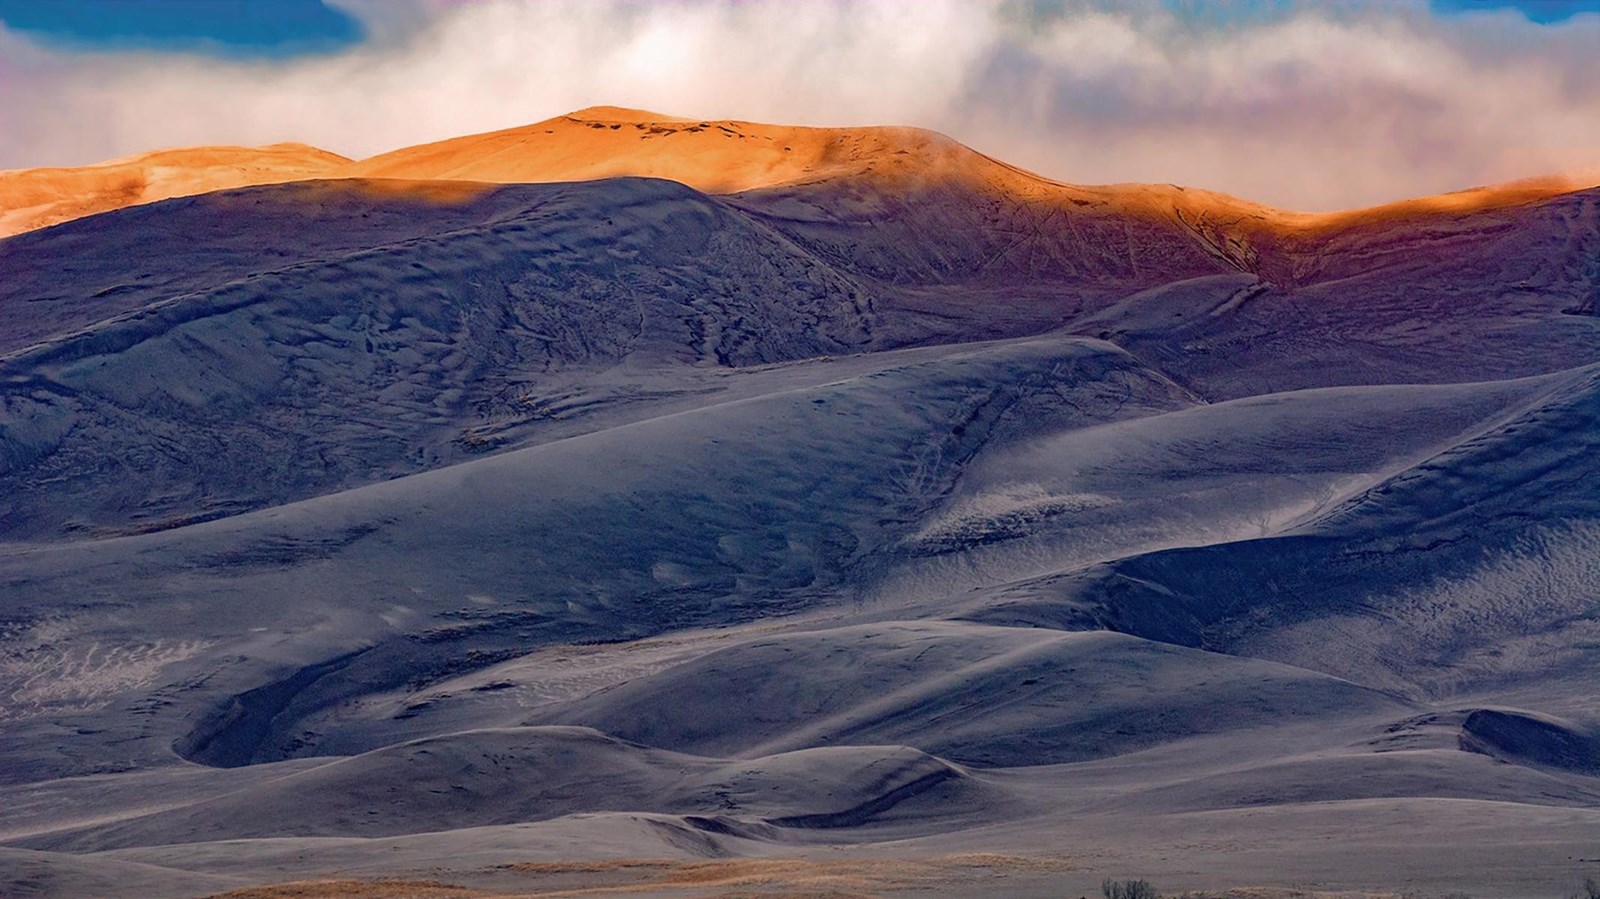 The top of a tall dune is illuminated by the rising sun, as clouds swirl in blue sky